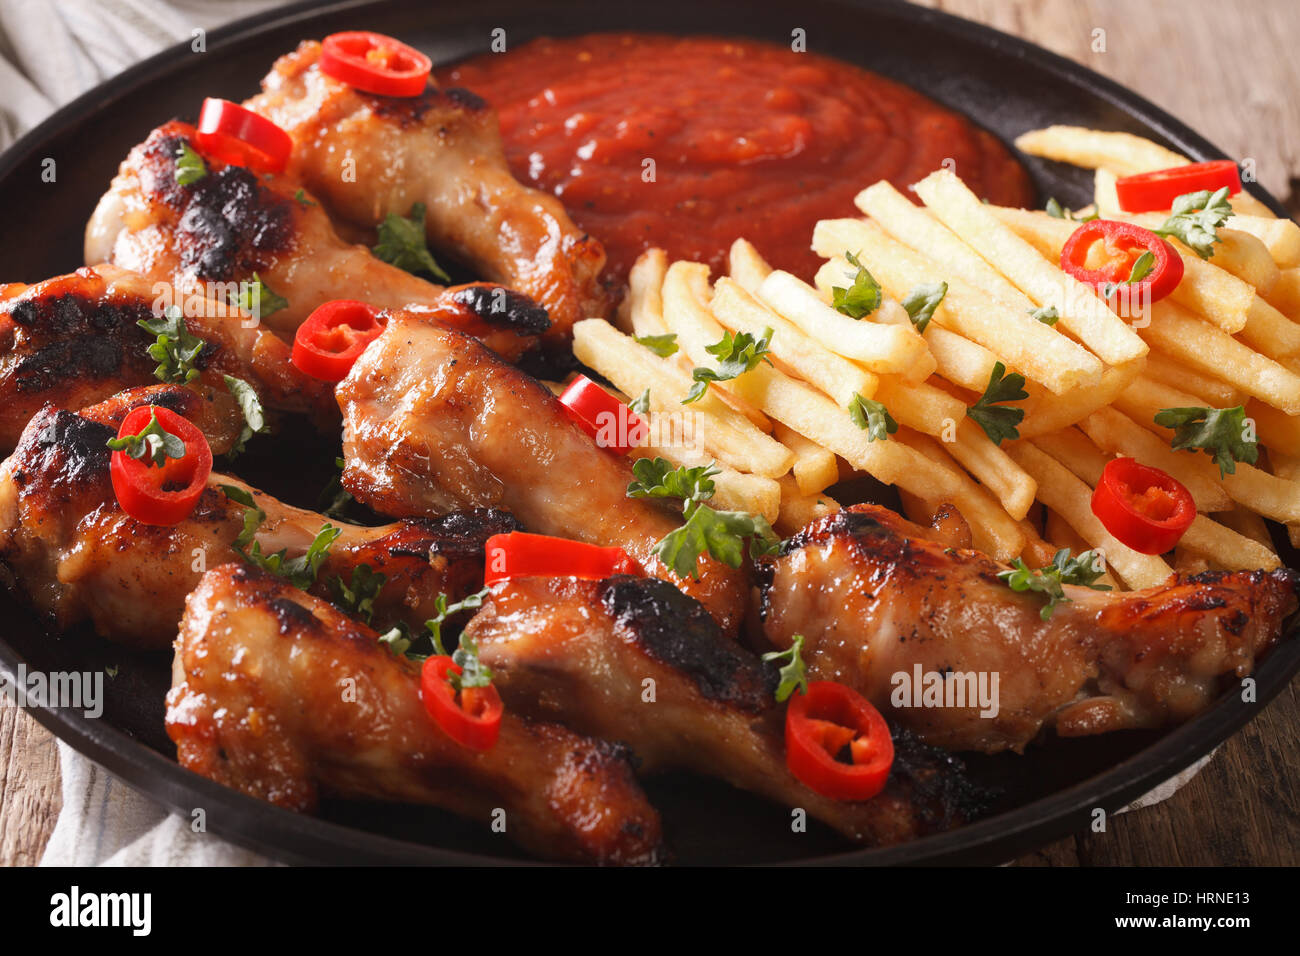 Roasted chicken wings with french fries and ketchup on a plate close-up. horizontal Stock Photo